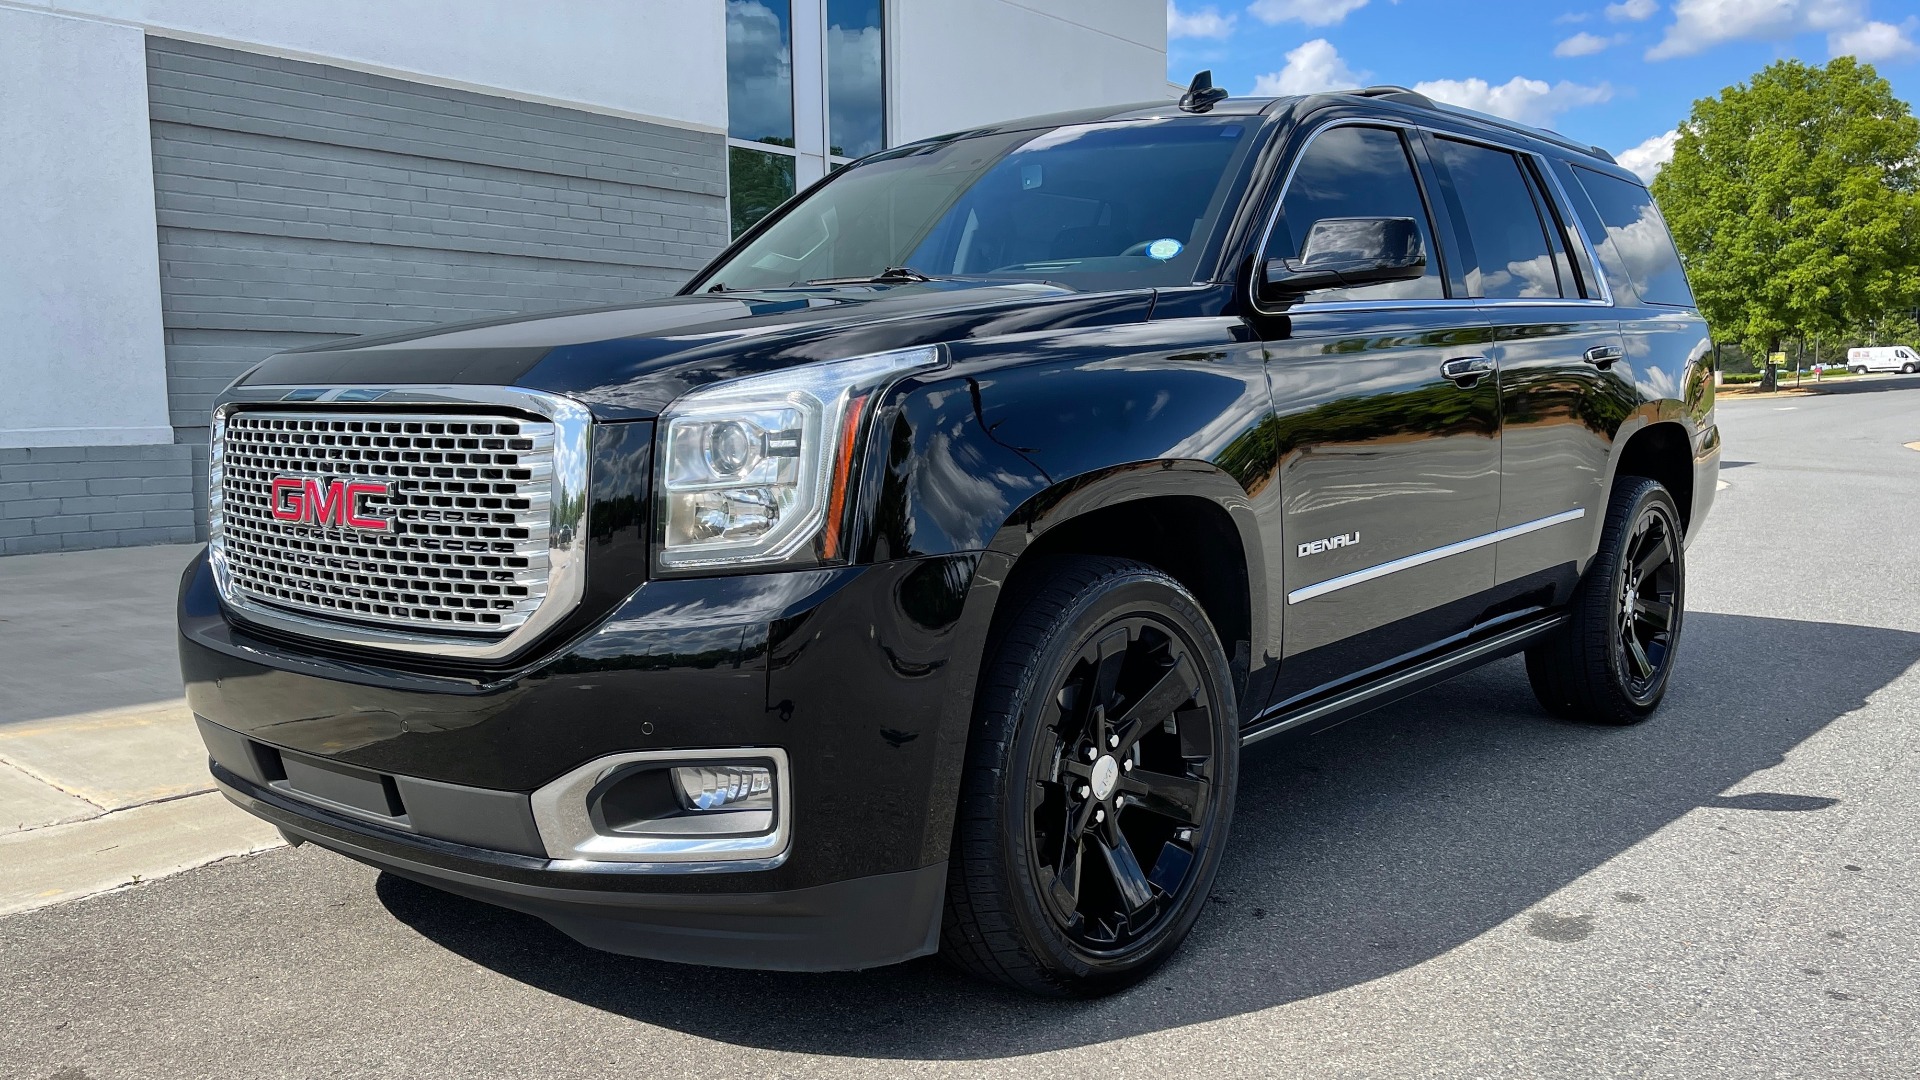 Used 2017 GMC YUKON DENALI 4WD / OPEN ROAD / NAV / ENTERTAINMENT / SUNROOF / ADAPT CRUISE for sale Sold at Formula Imports in Charlotte NC 28227 3